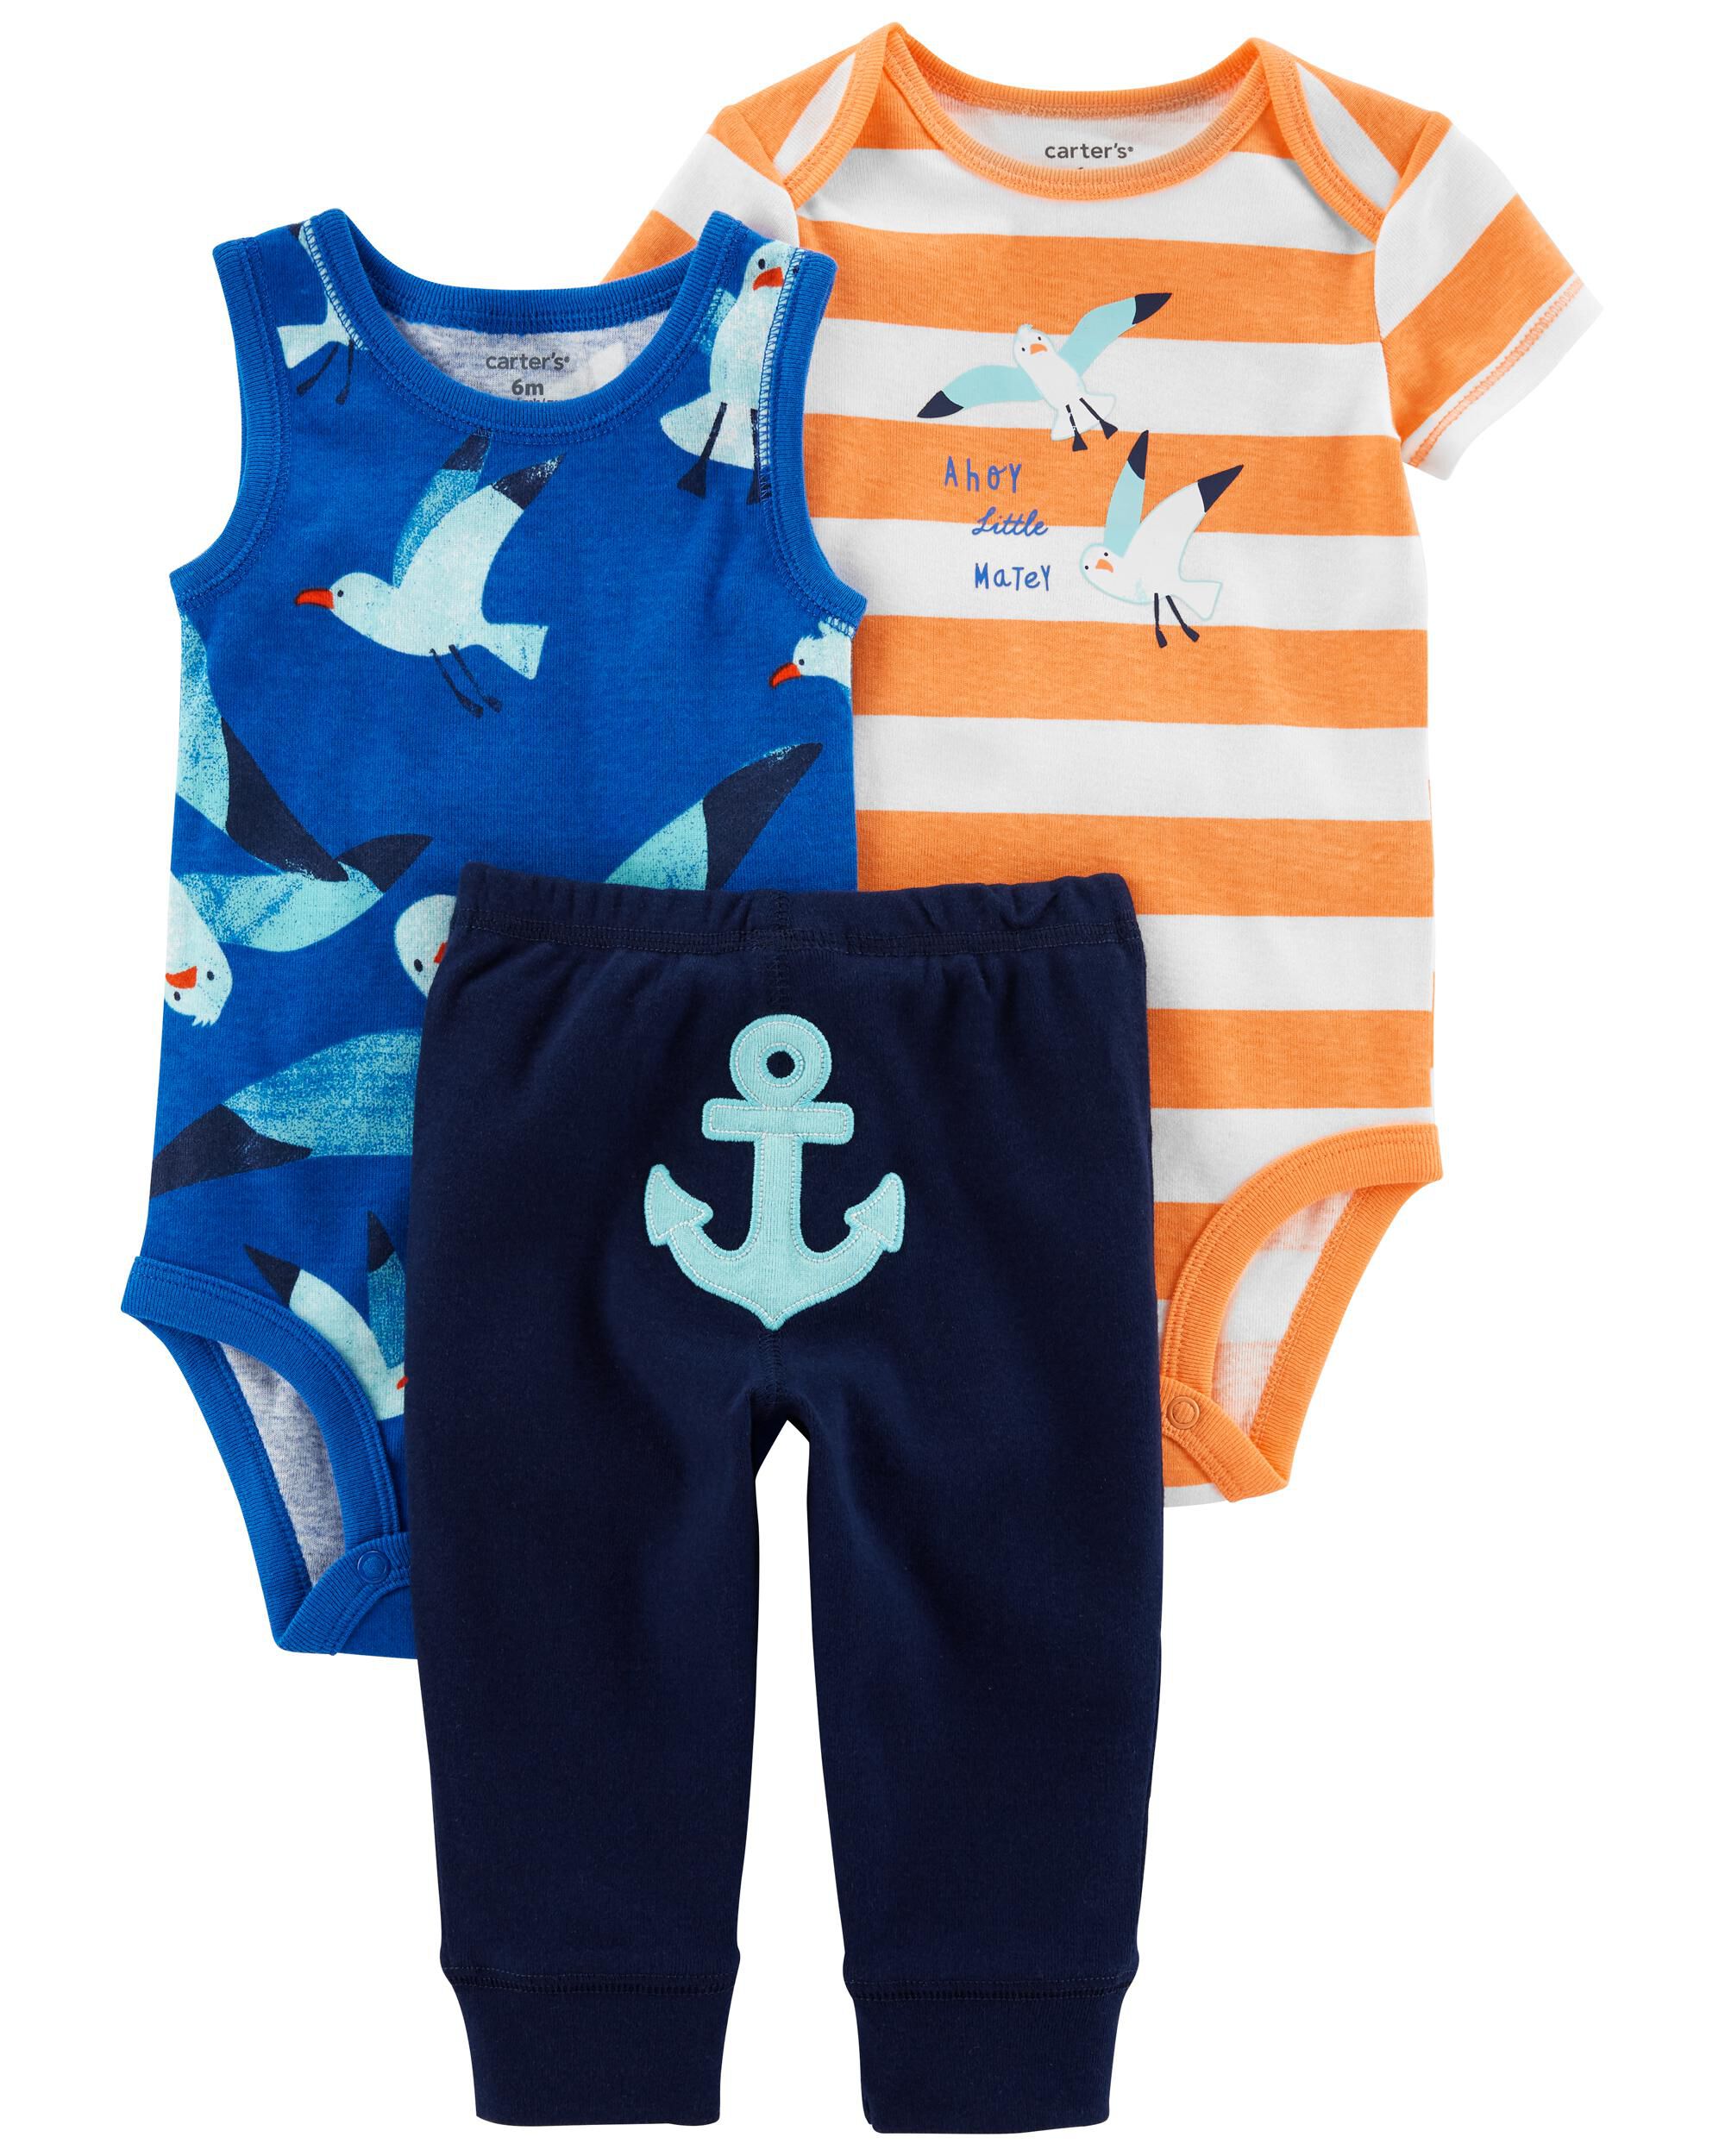 Carters Baby 3-Piece Anchor Outfit Set